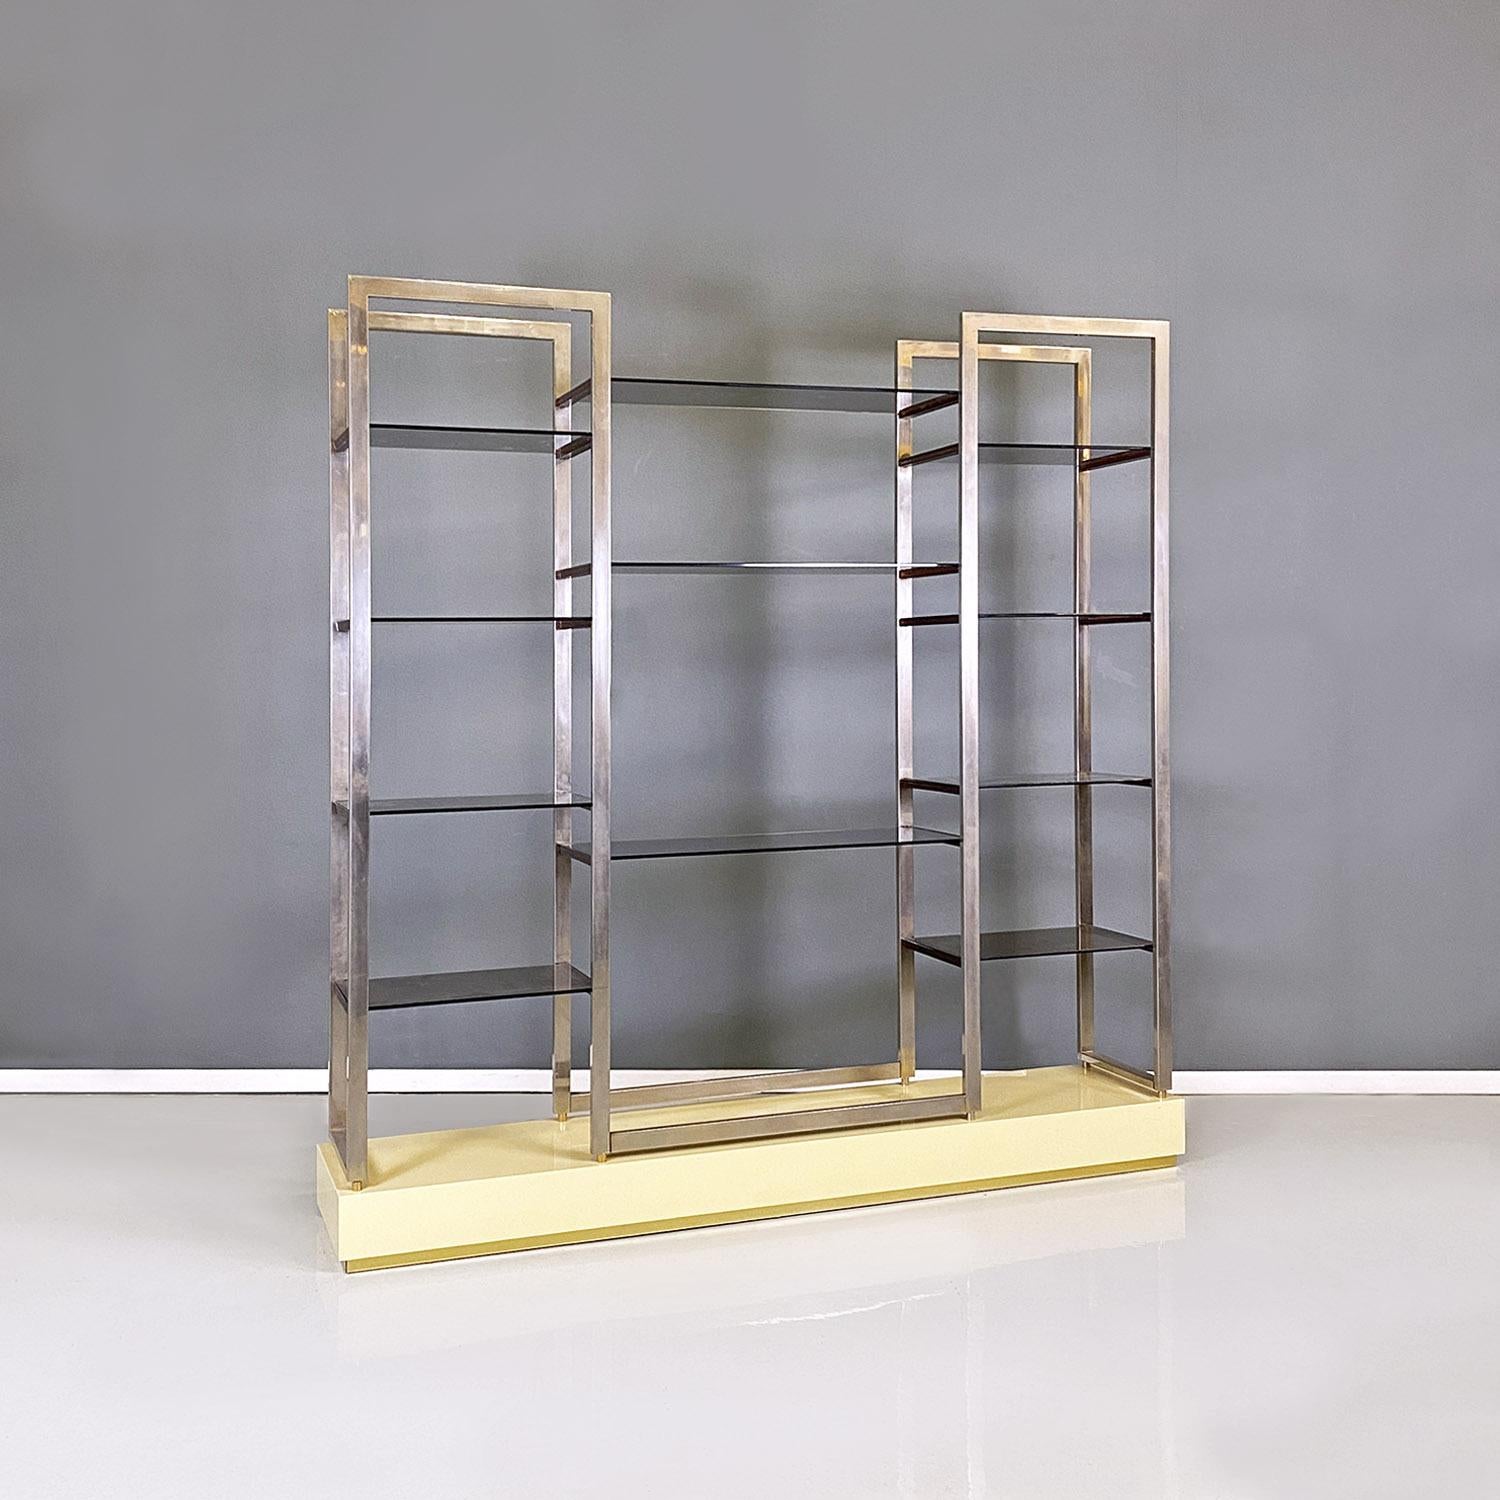 Modern French modern smoked glass metal lacquered wood bookcase by Alain Delon, 1980s For Sale